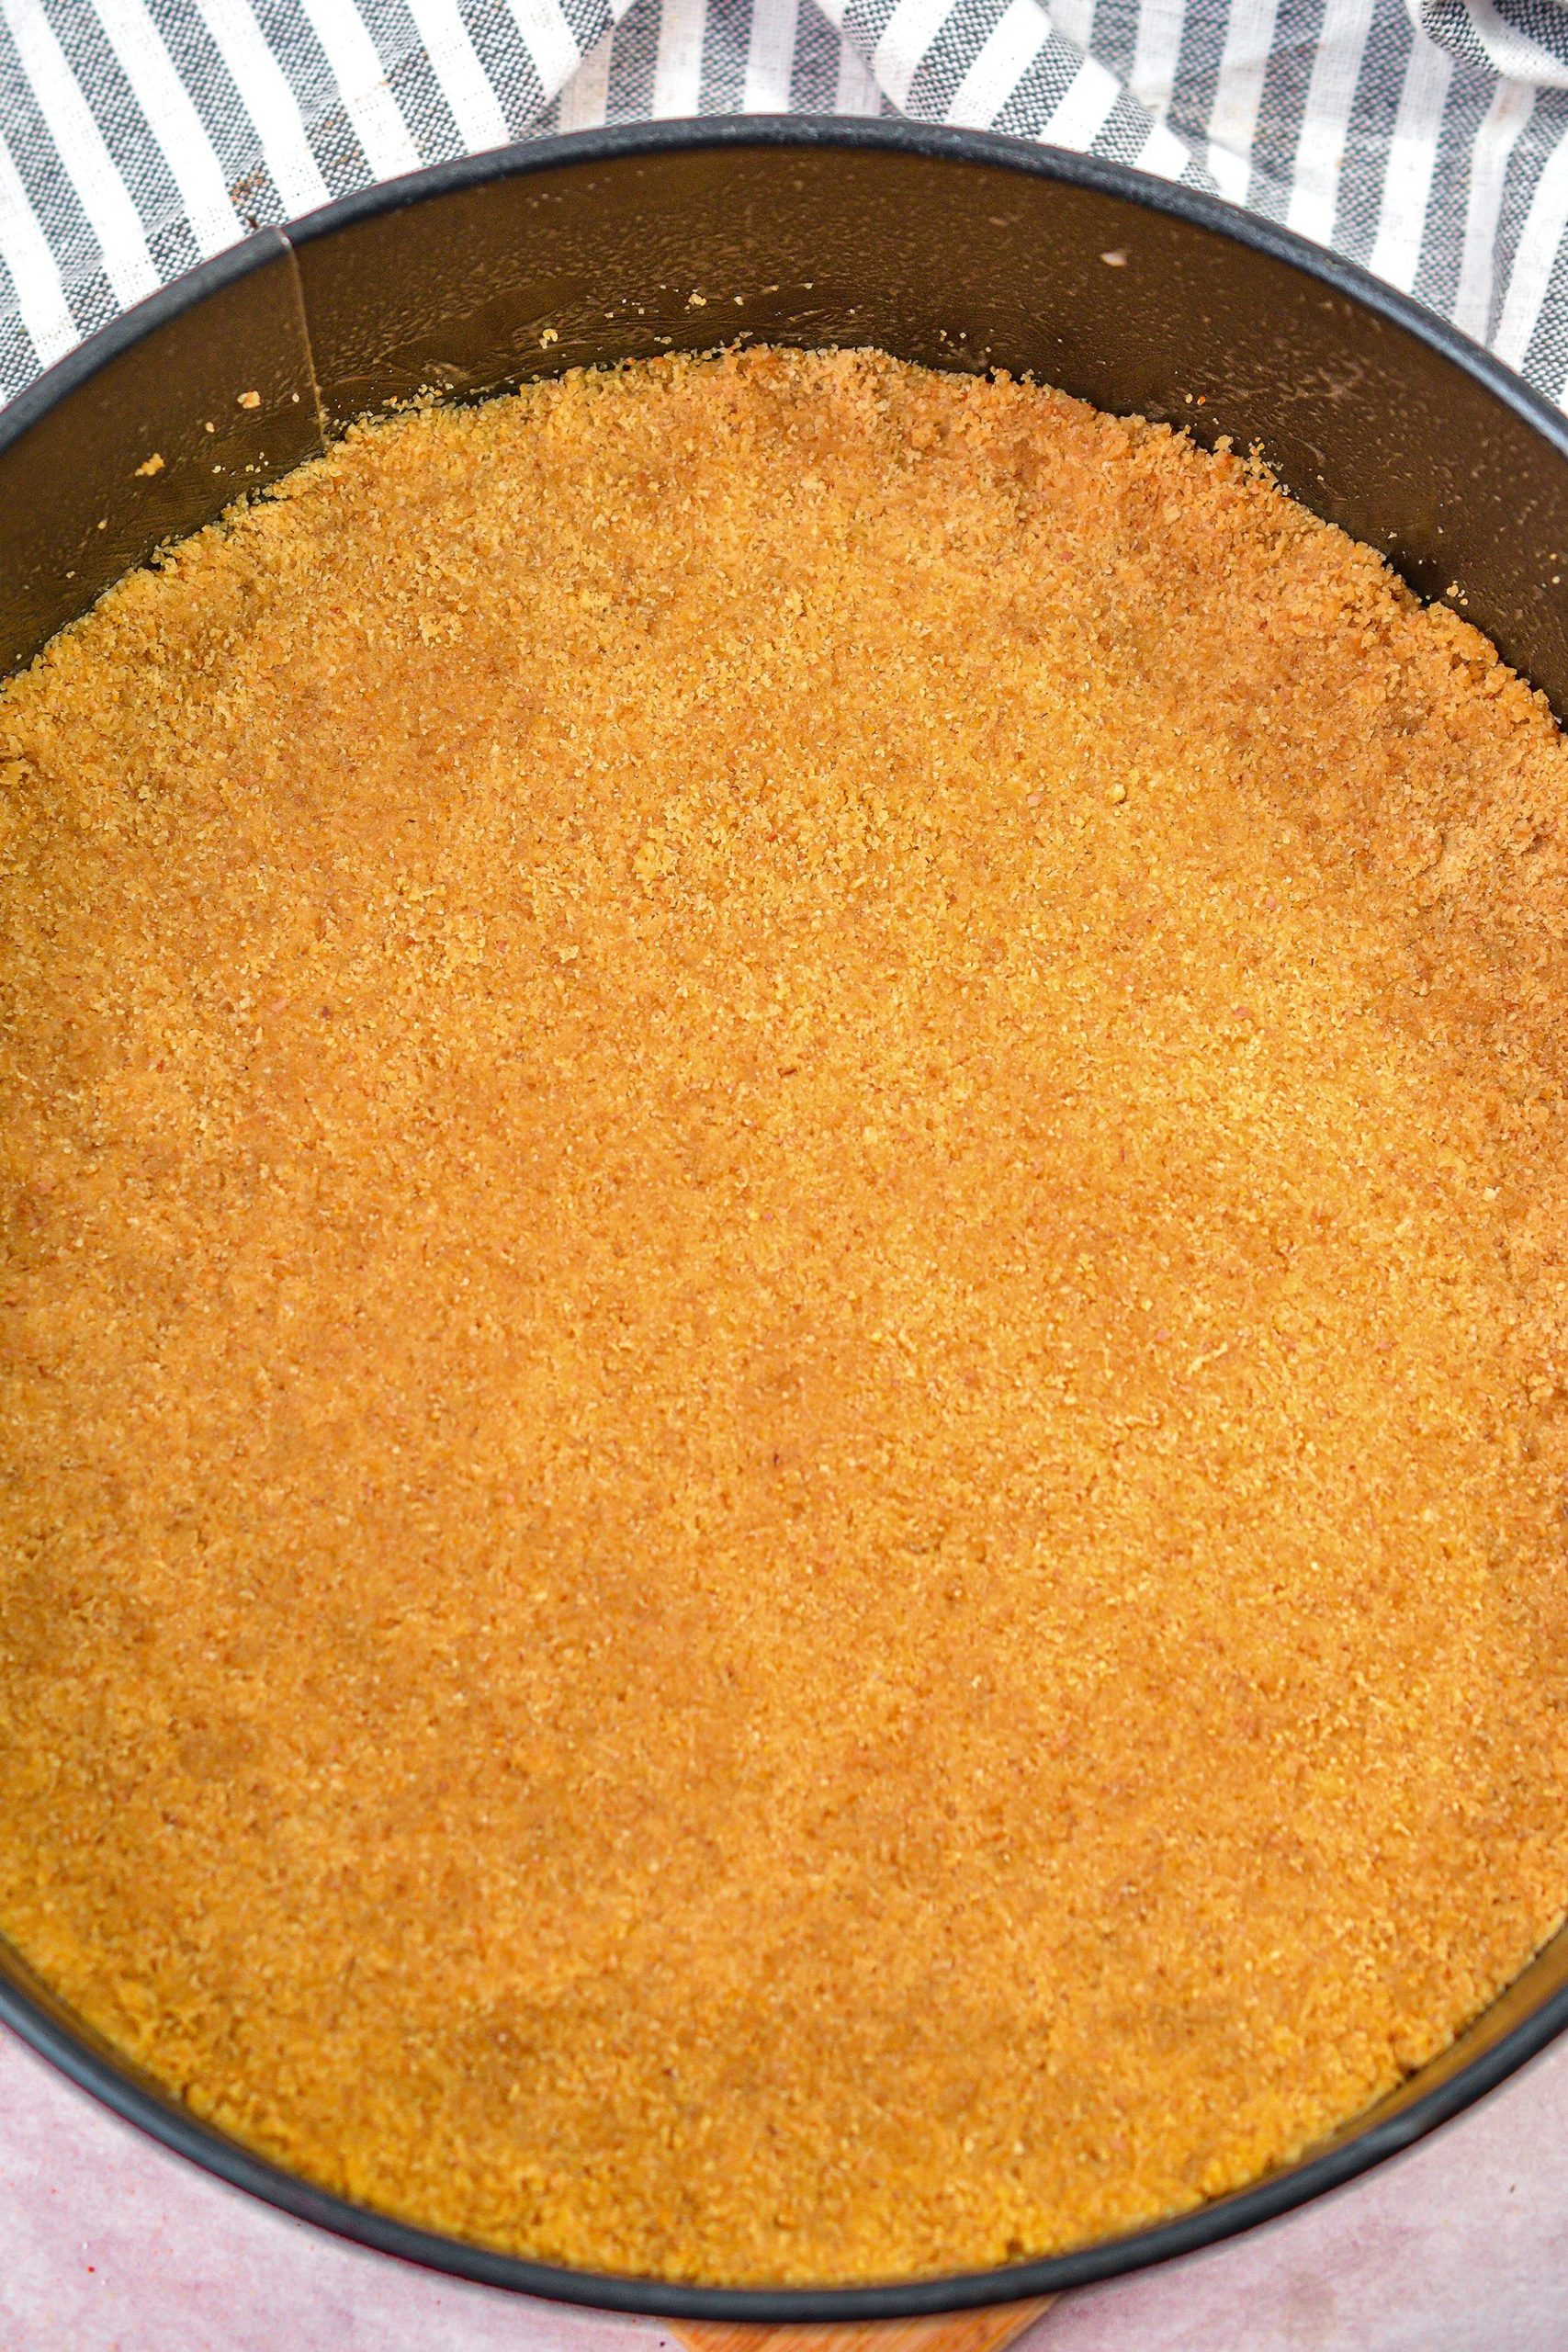 Press the crust mixture into a well-greased 9-inch springform pan.